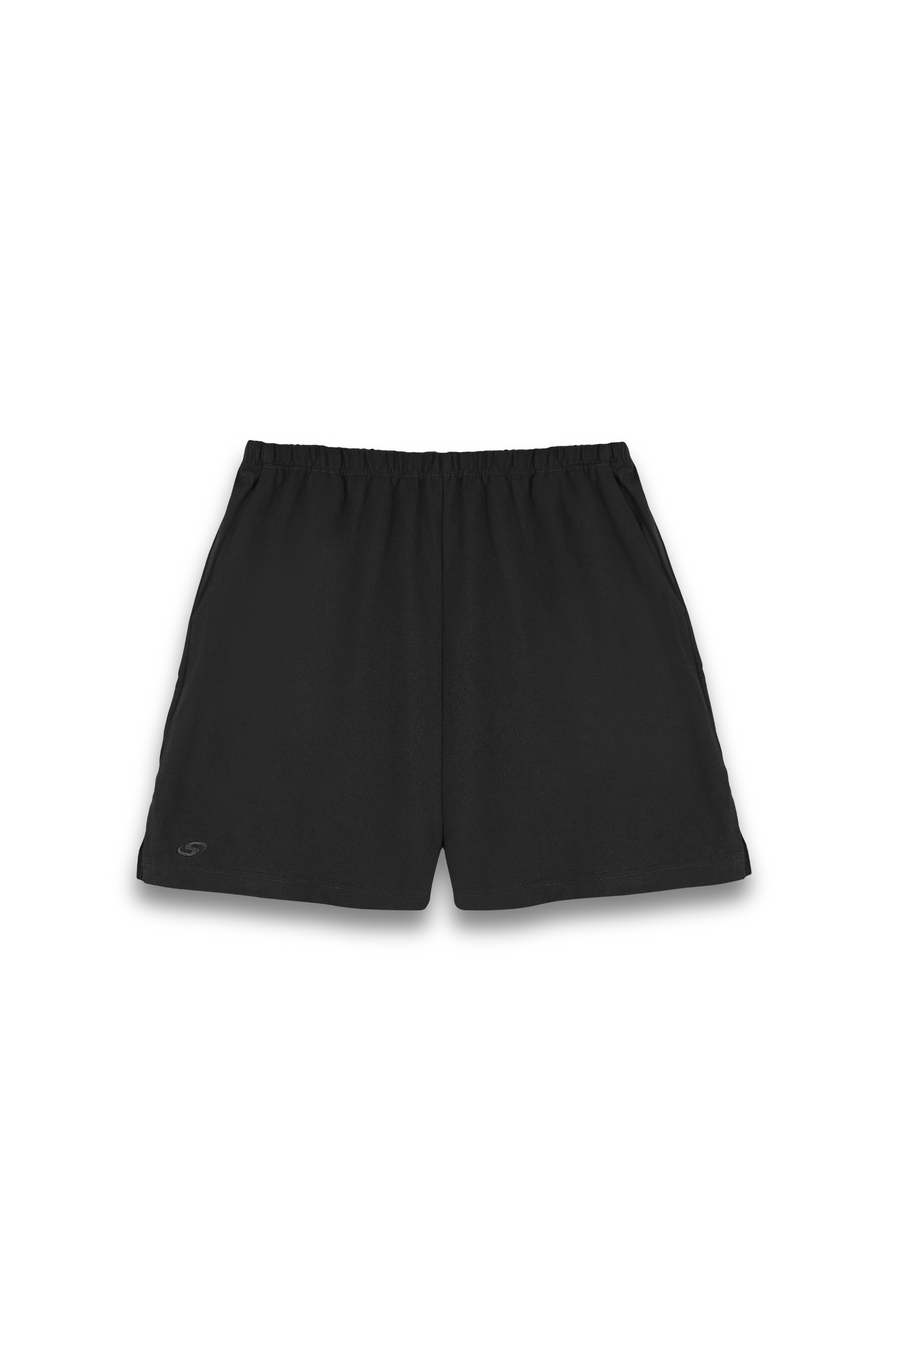 Series Oversized Shorts in Carbon